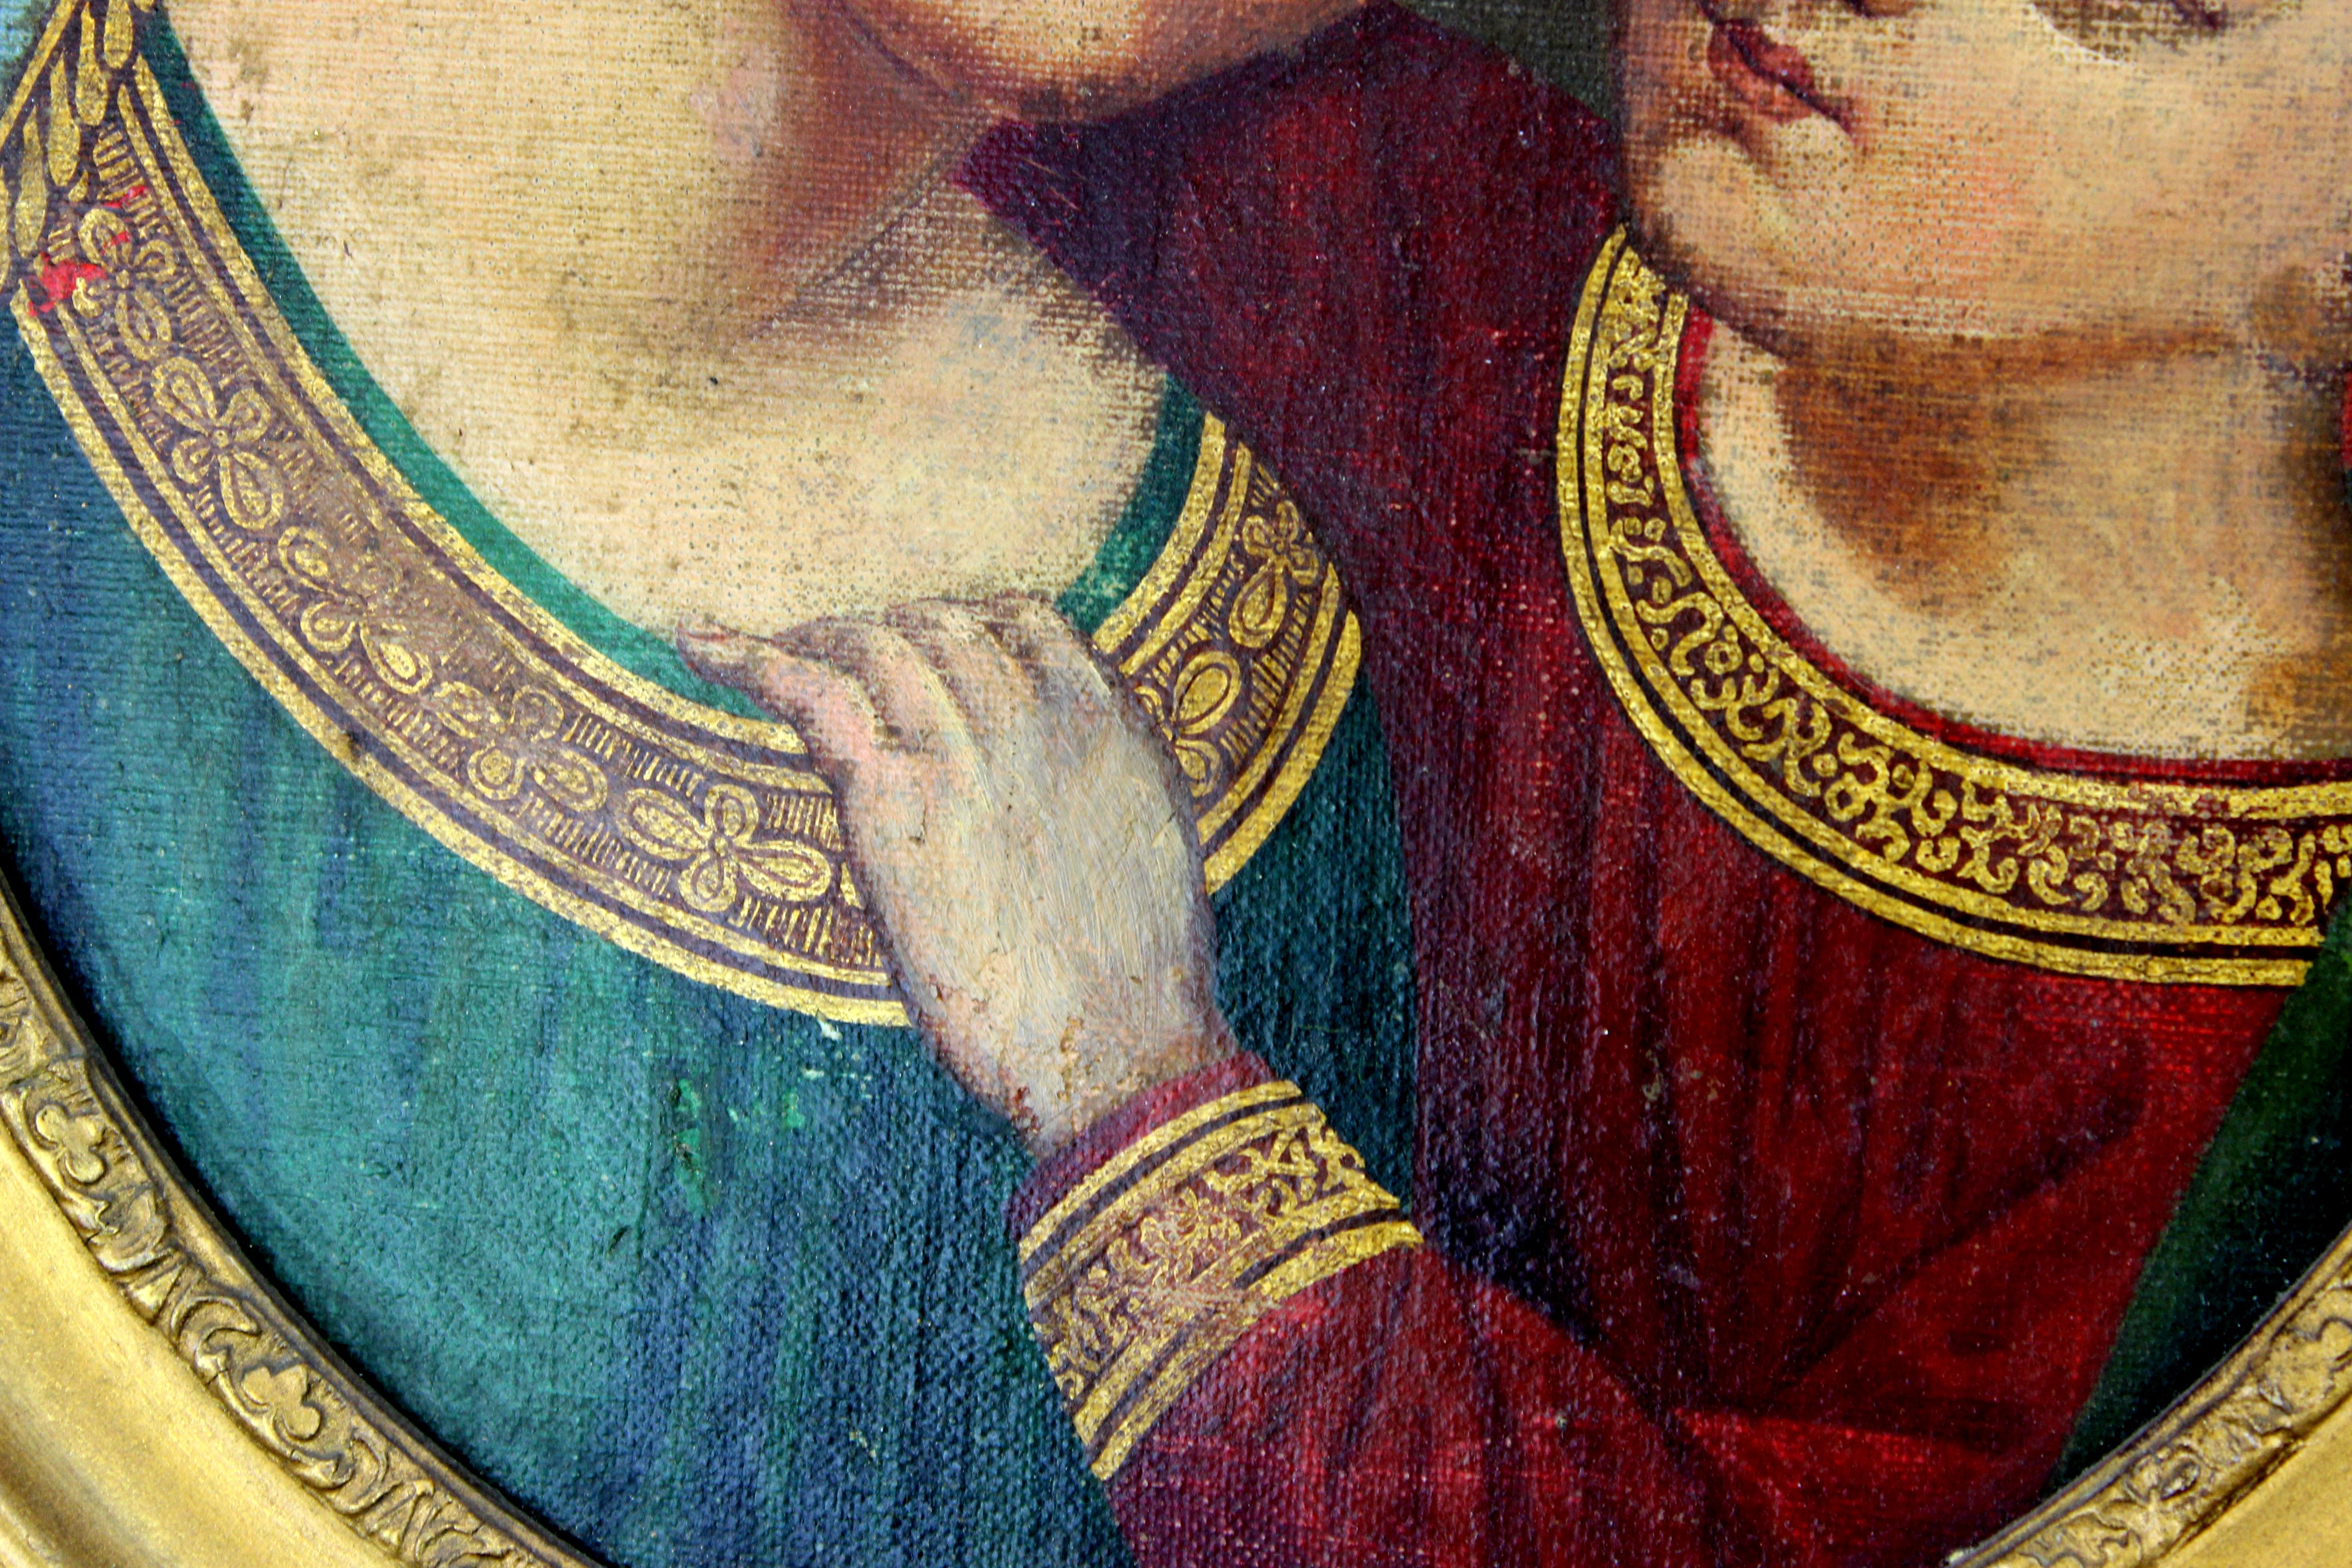 Oiled Antique oil on hardboard painting depicting Madonna and child, 19th century